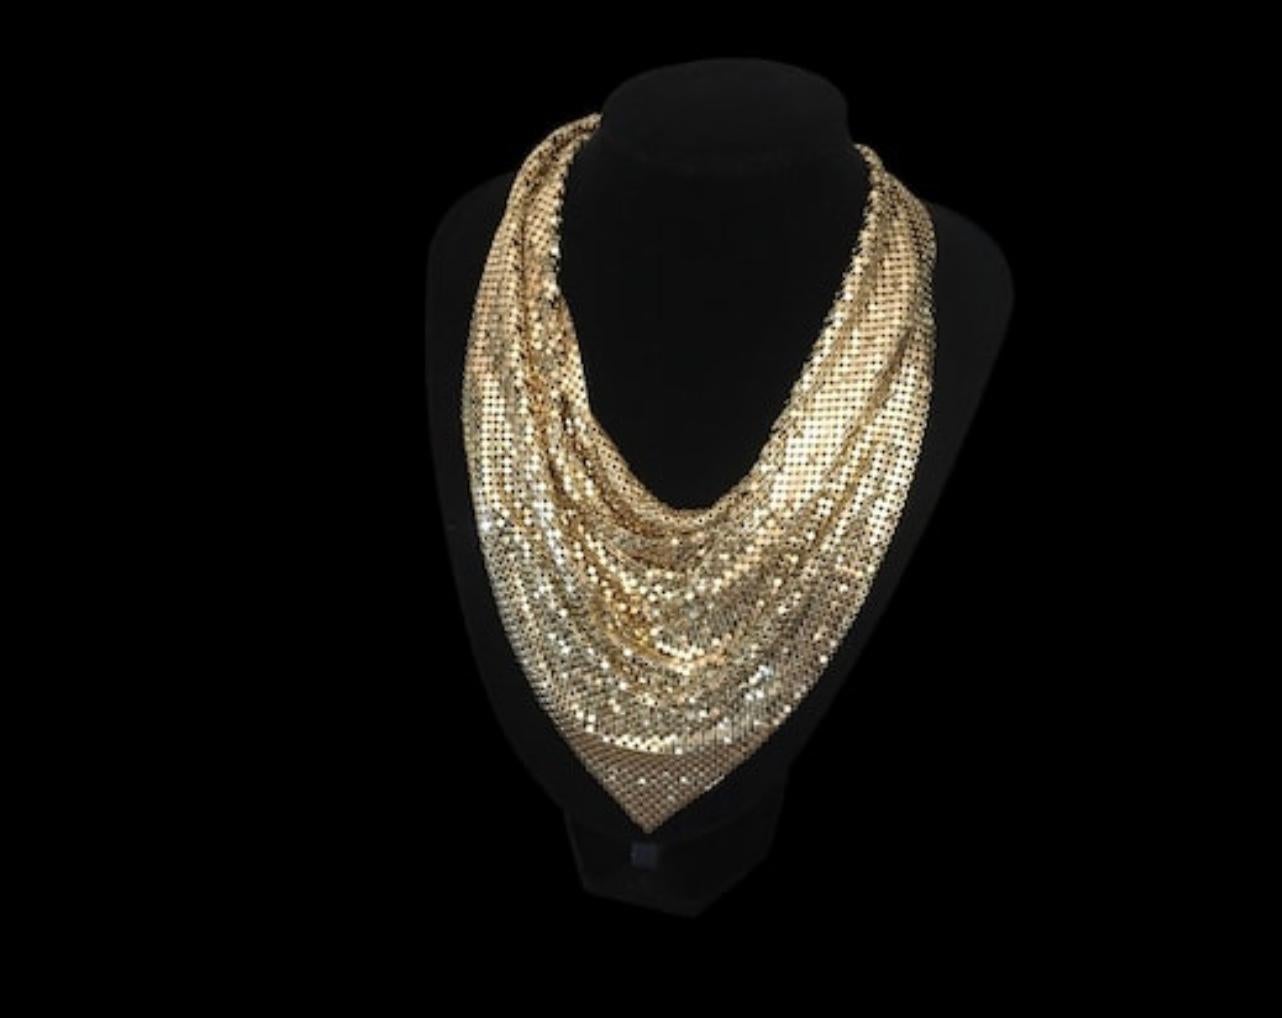 Vintage 1960’s gold chain mail bib necklace by designer whiting and Davis in very good condition looks unworn
designer necklace 
Era 1960’s
9 “L x 2” W x 16“ H 
With makers tag
hook closure that is adjustable to fit several sizes.
Known for